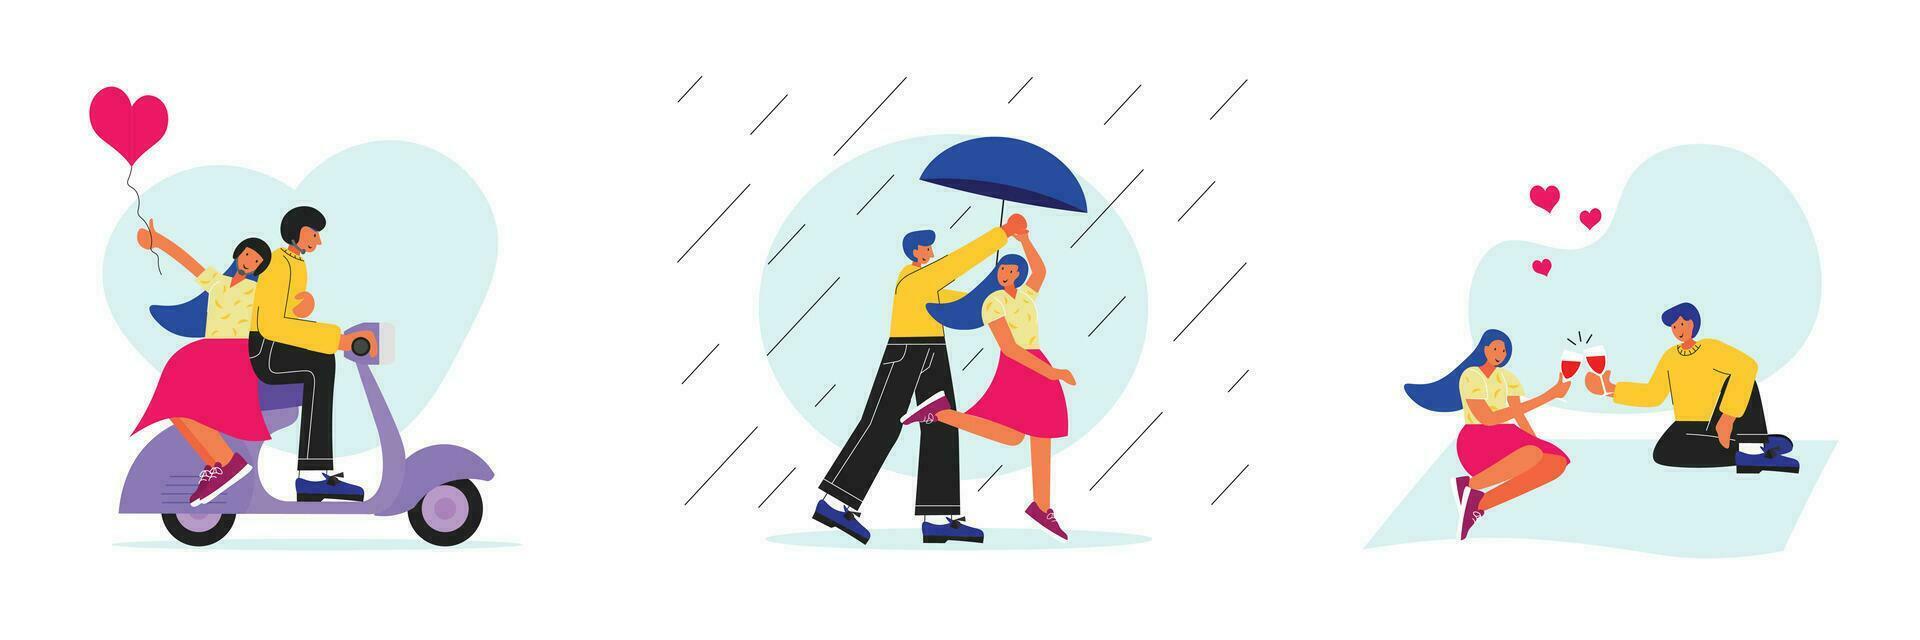 Valentines day set. People in romantic relationship. Couple riding a scooter, picnic, dancing vector